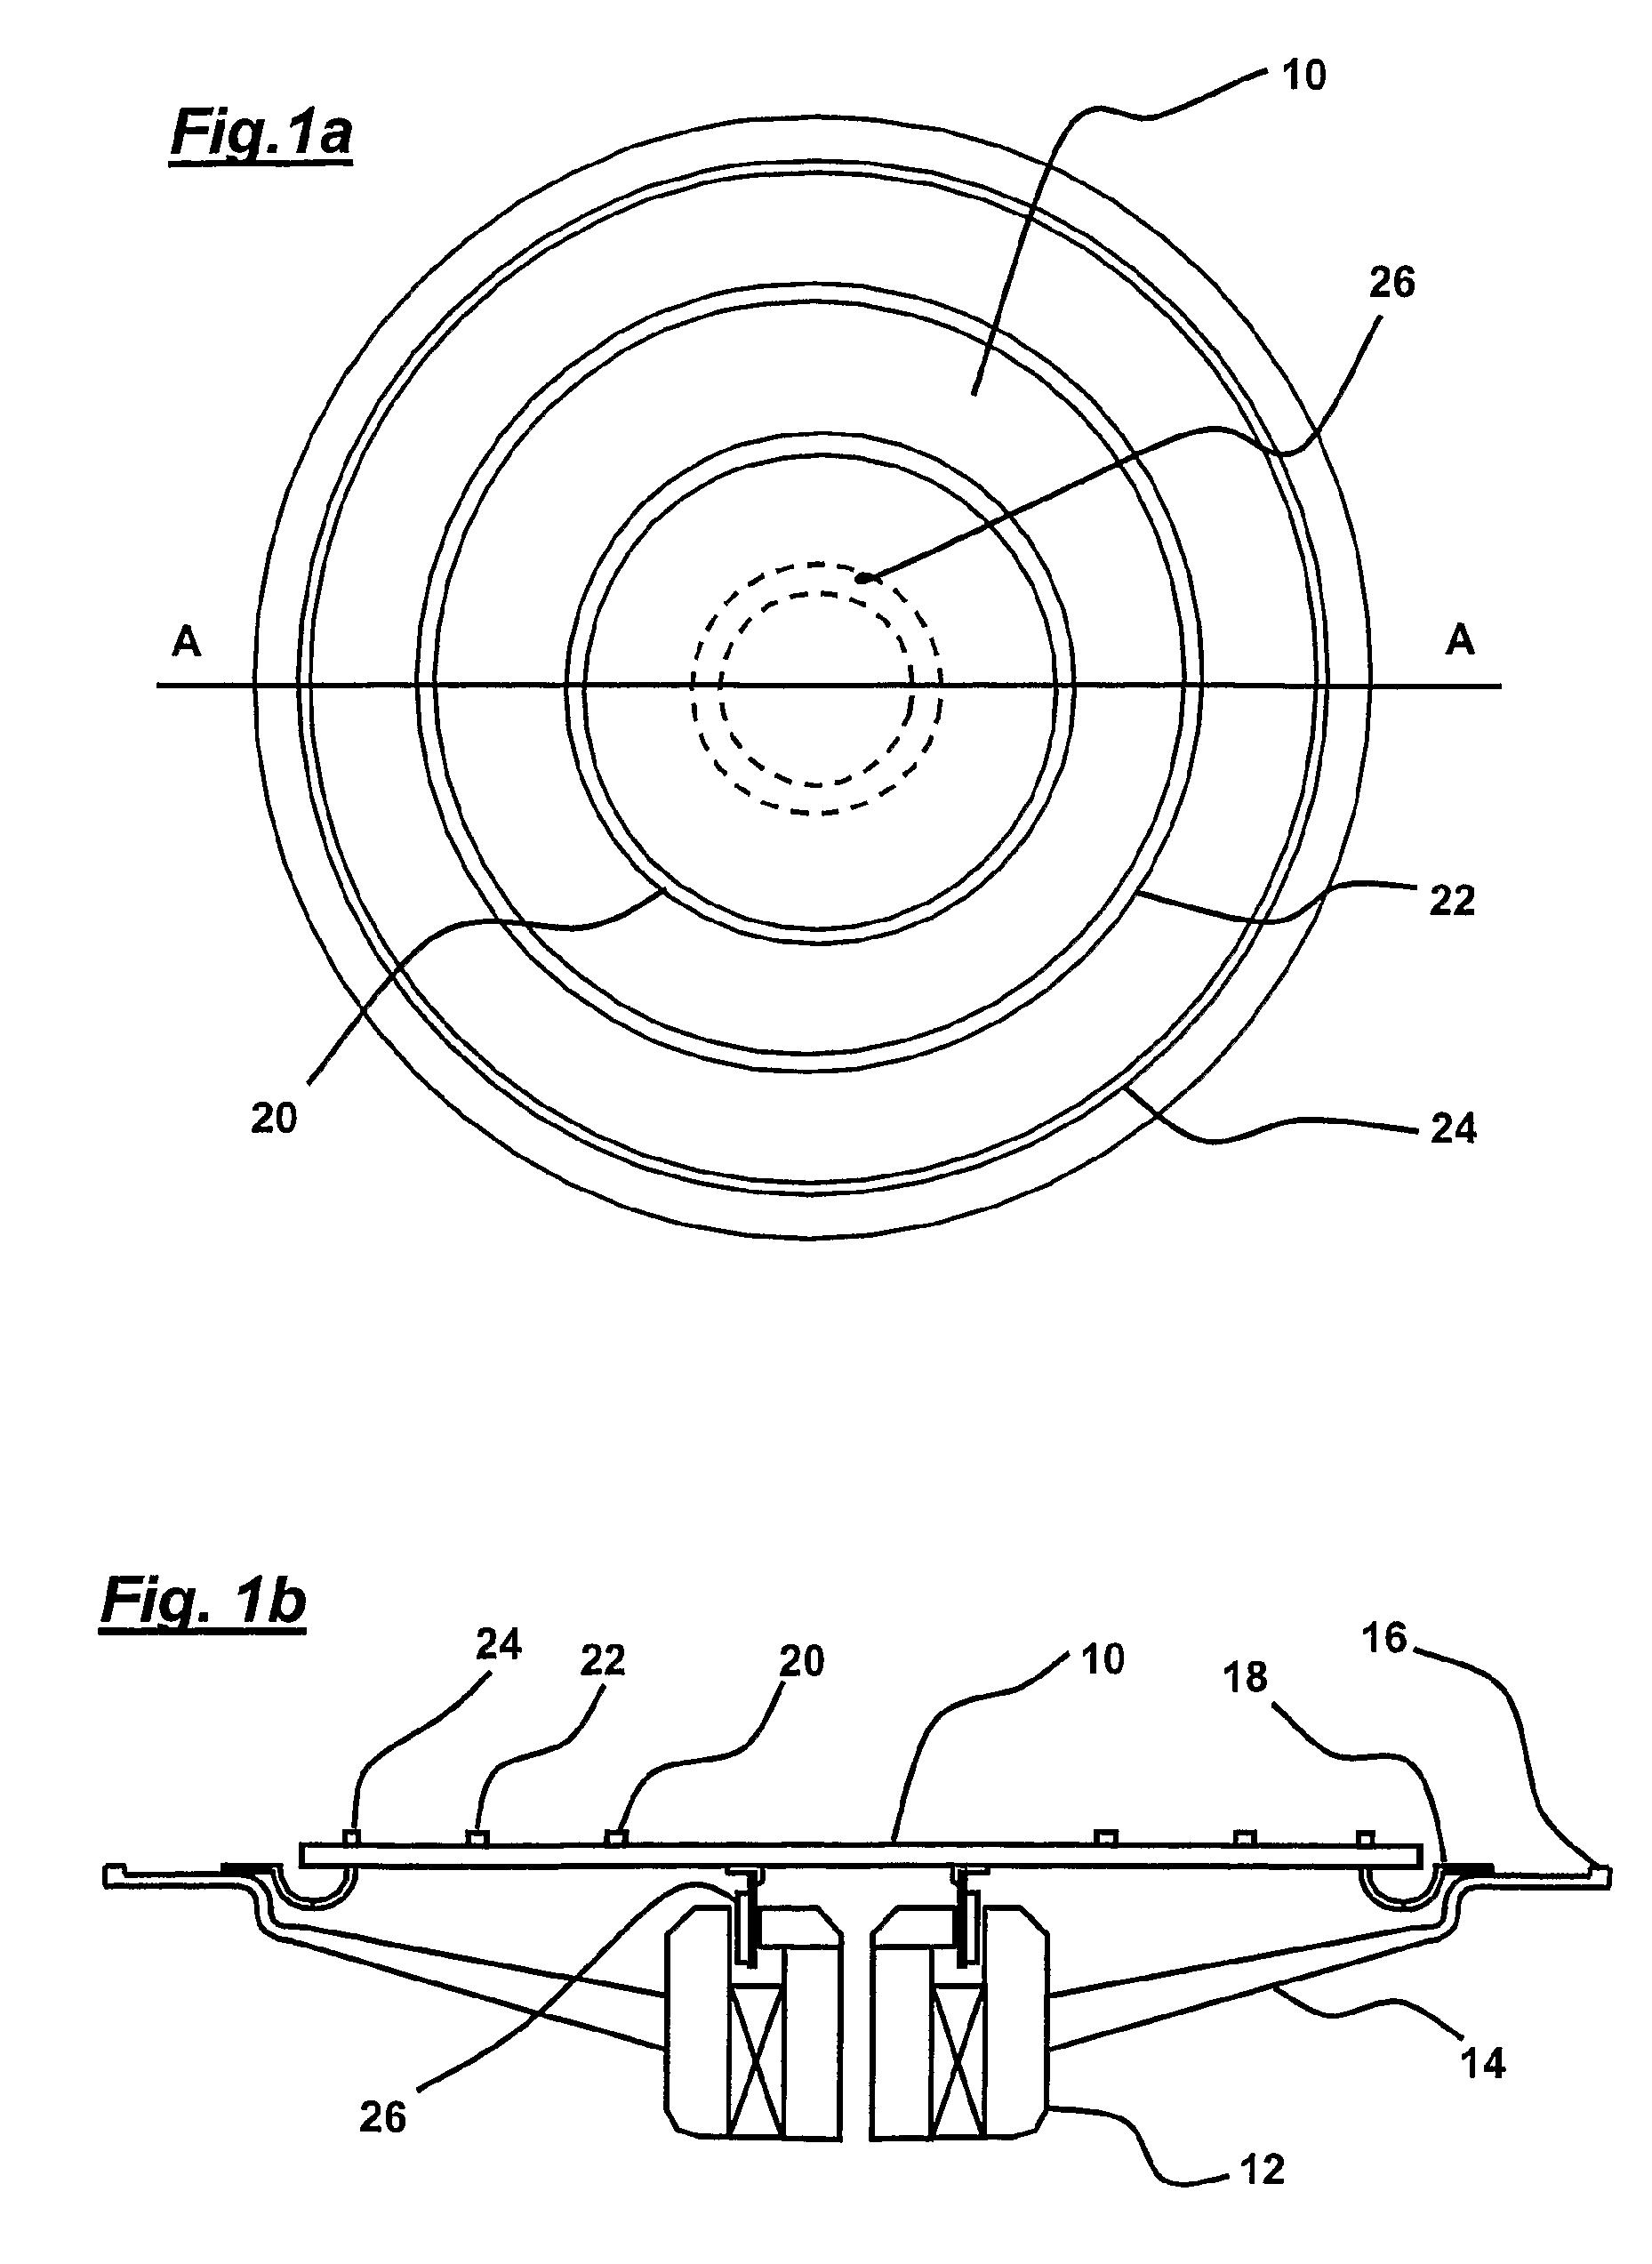 Acoustic device and method of making acoustic device